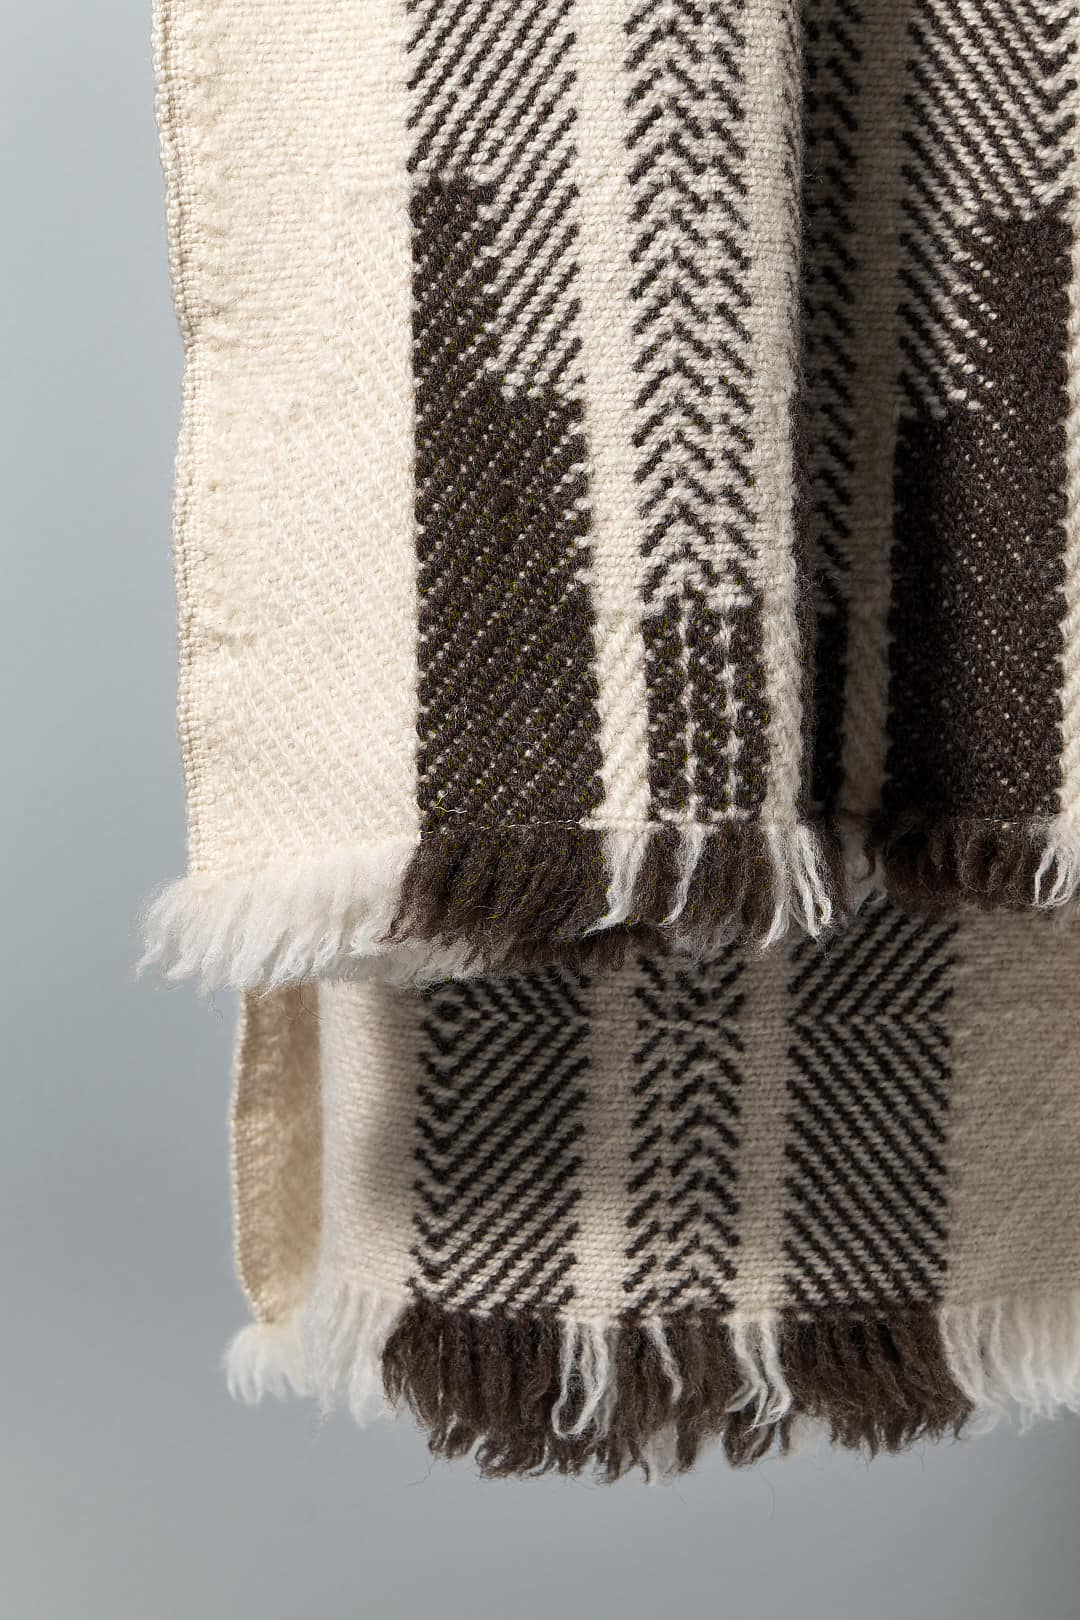 A close up of a Bulgarian Wool Blanket from the brand Rodopska Takan.